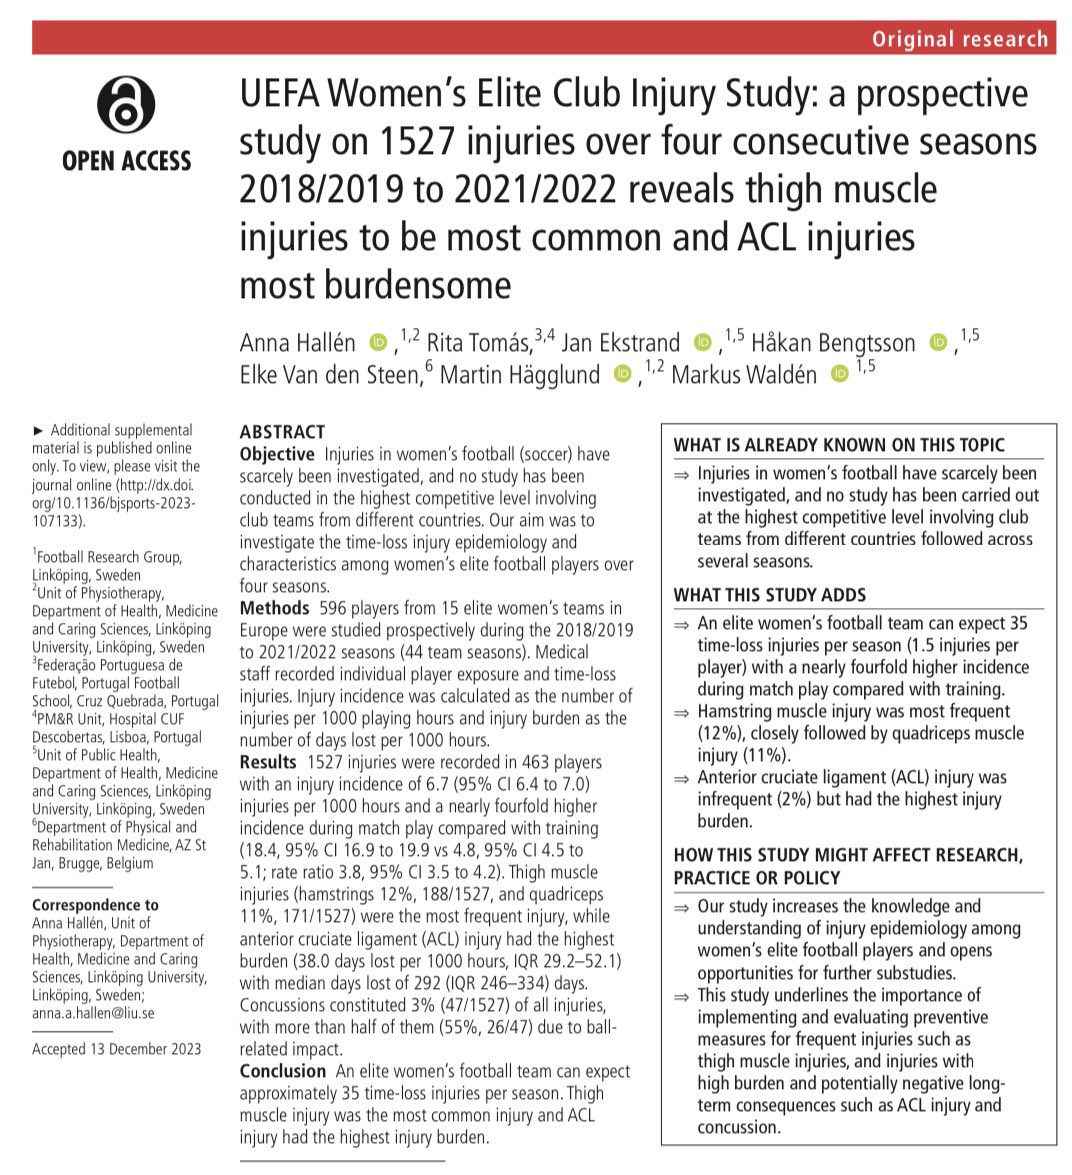 It’s out!! The UEFA Women’s Elite Club Injury Study, included more than 1500 injuries during 2018/19 to 2021/22, which most likely makes it the largest prospective study on women’s football injuries to date globally. And open access! bjsm.bmj.com/content/bjspor…